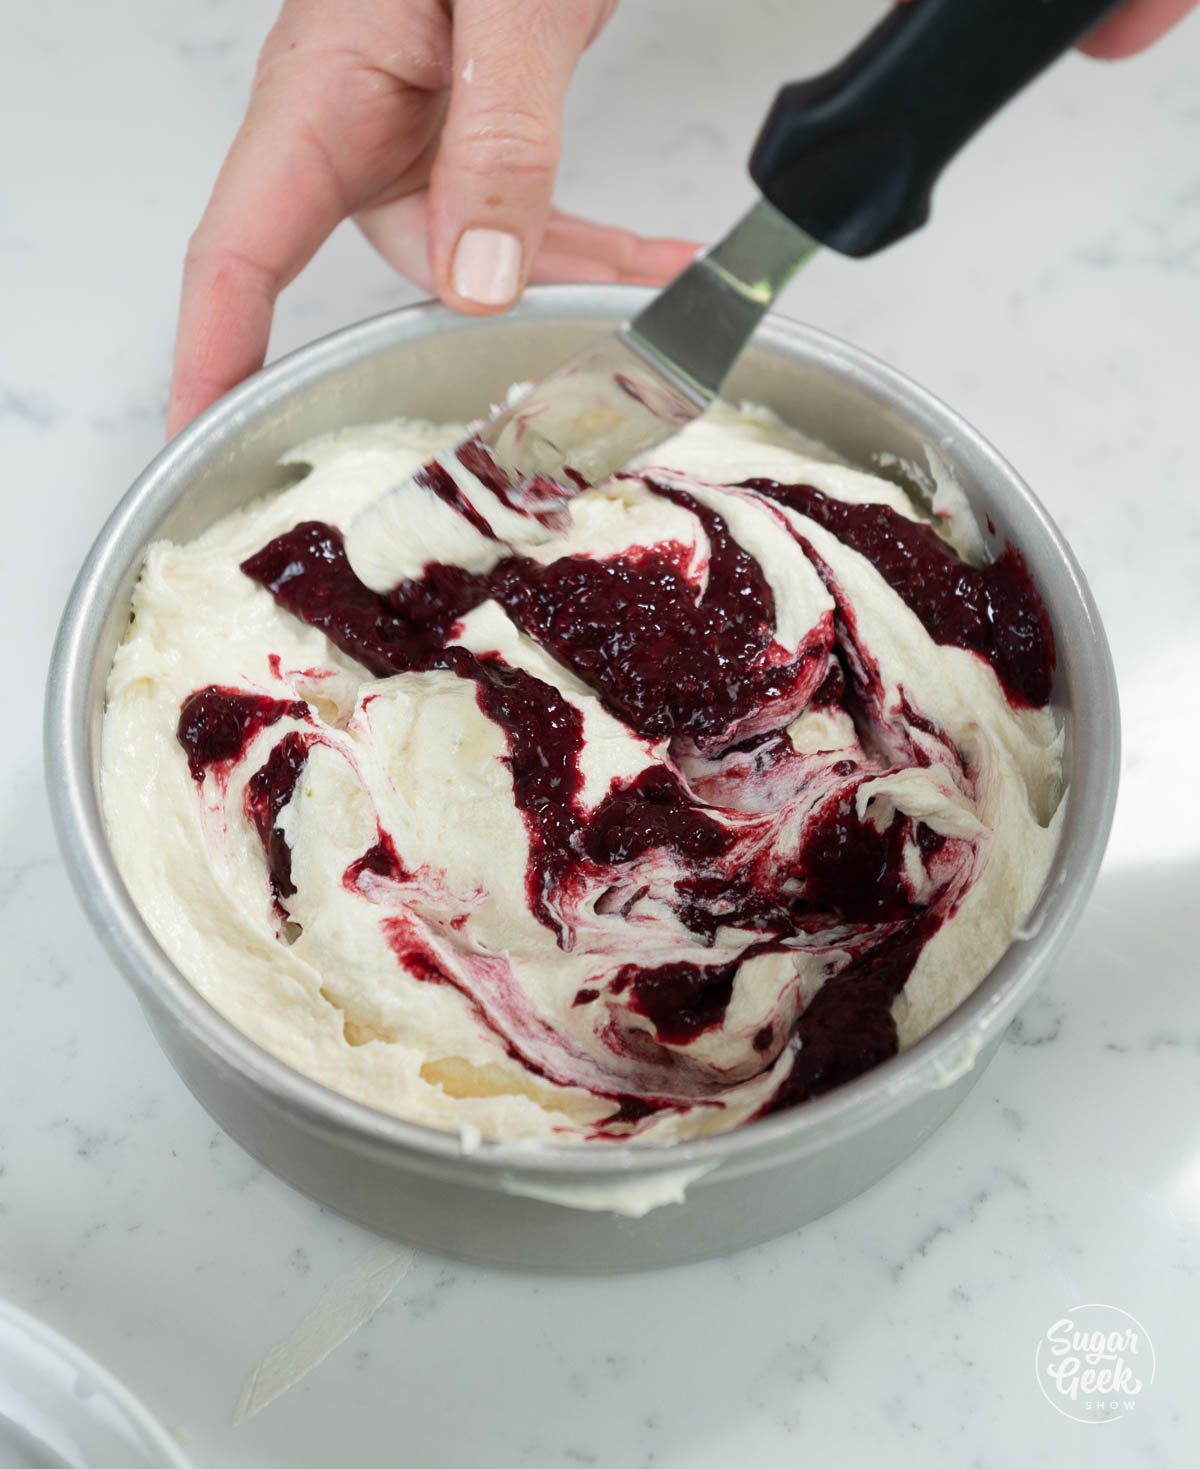 swirling blackberry puree into cake batter in pans